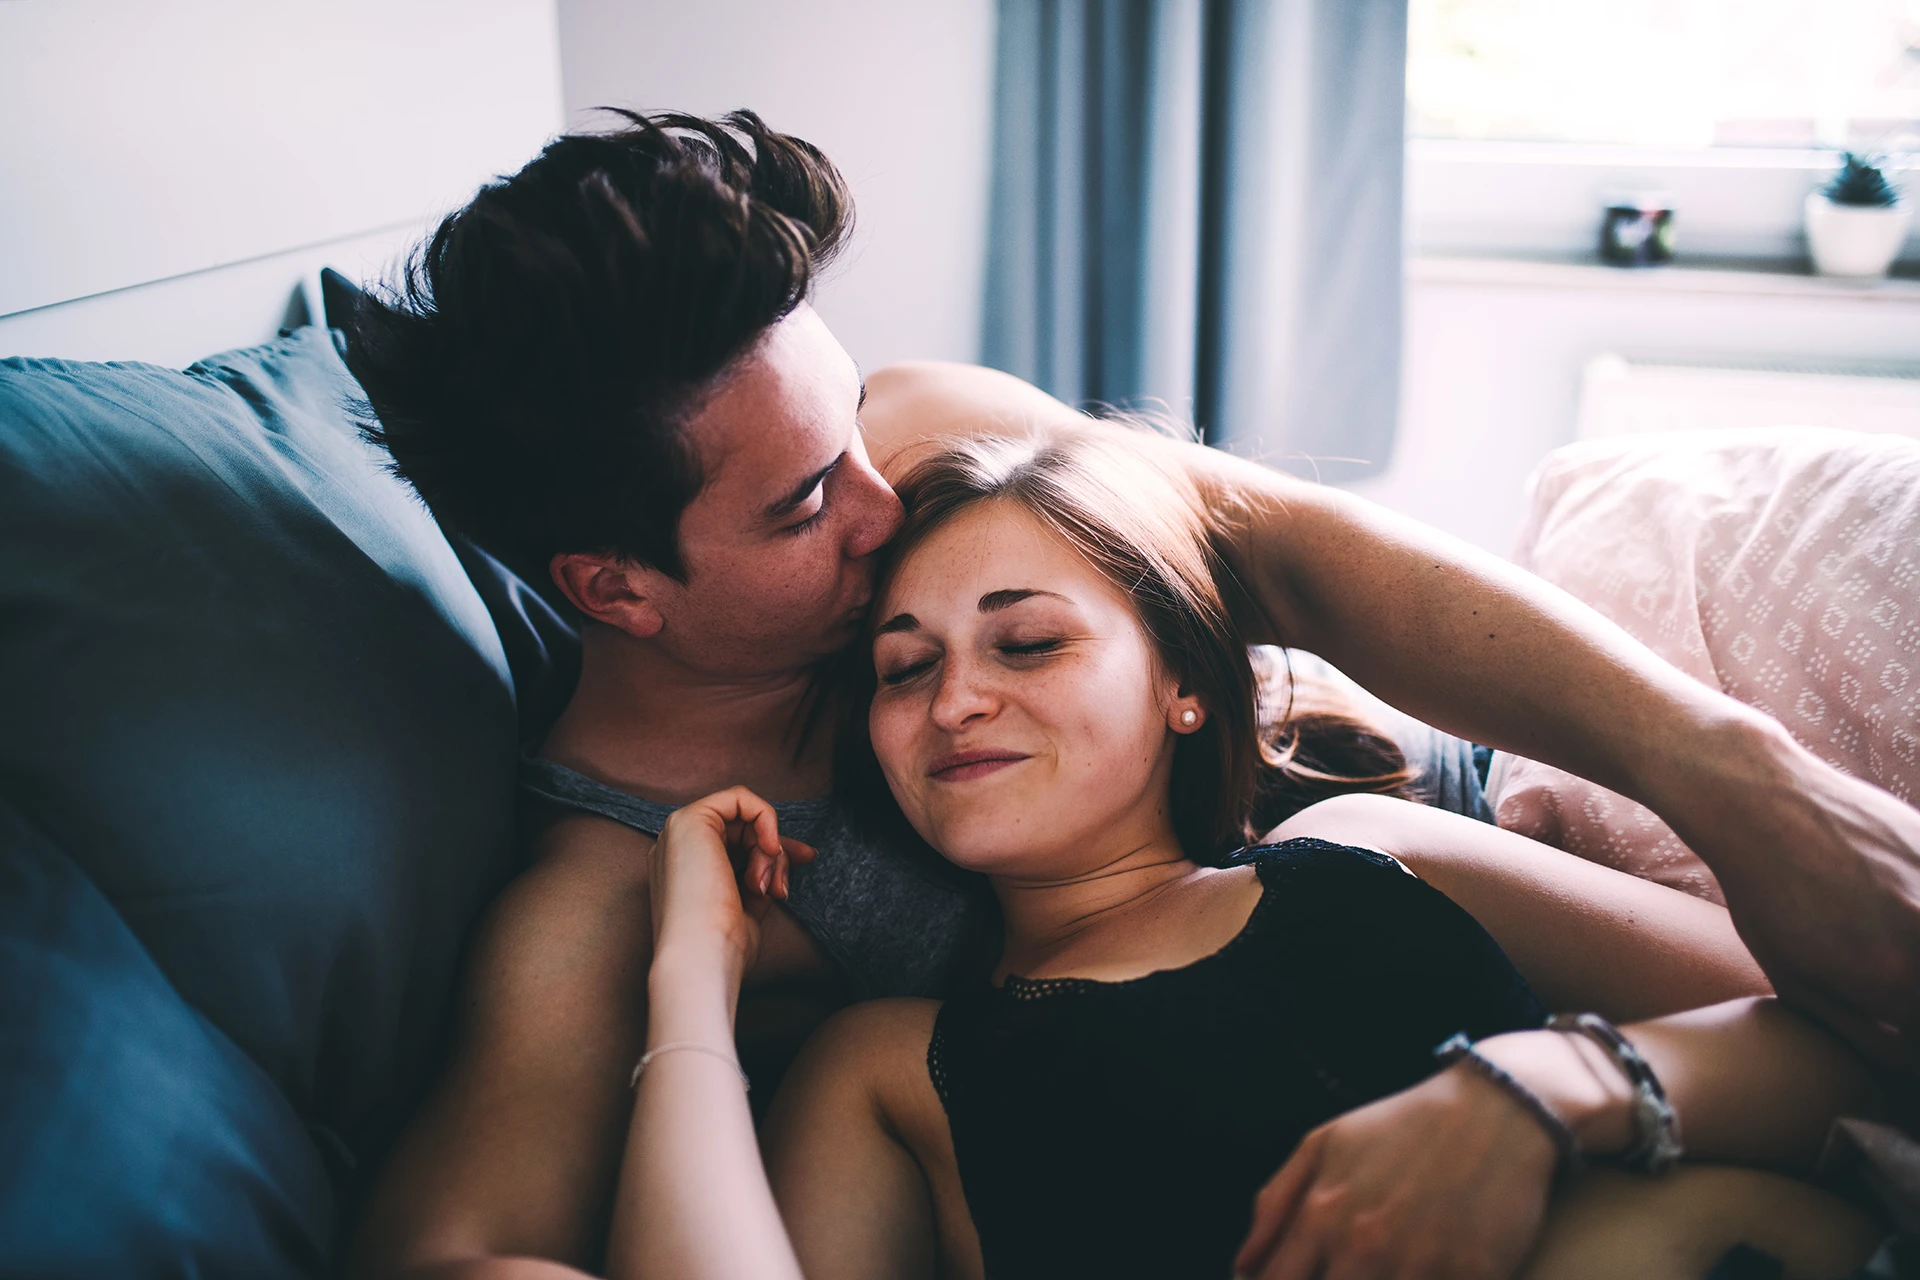 Couple embracing each other on couch